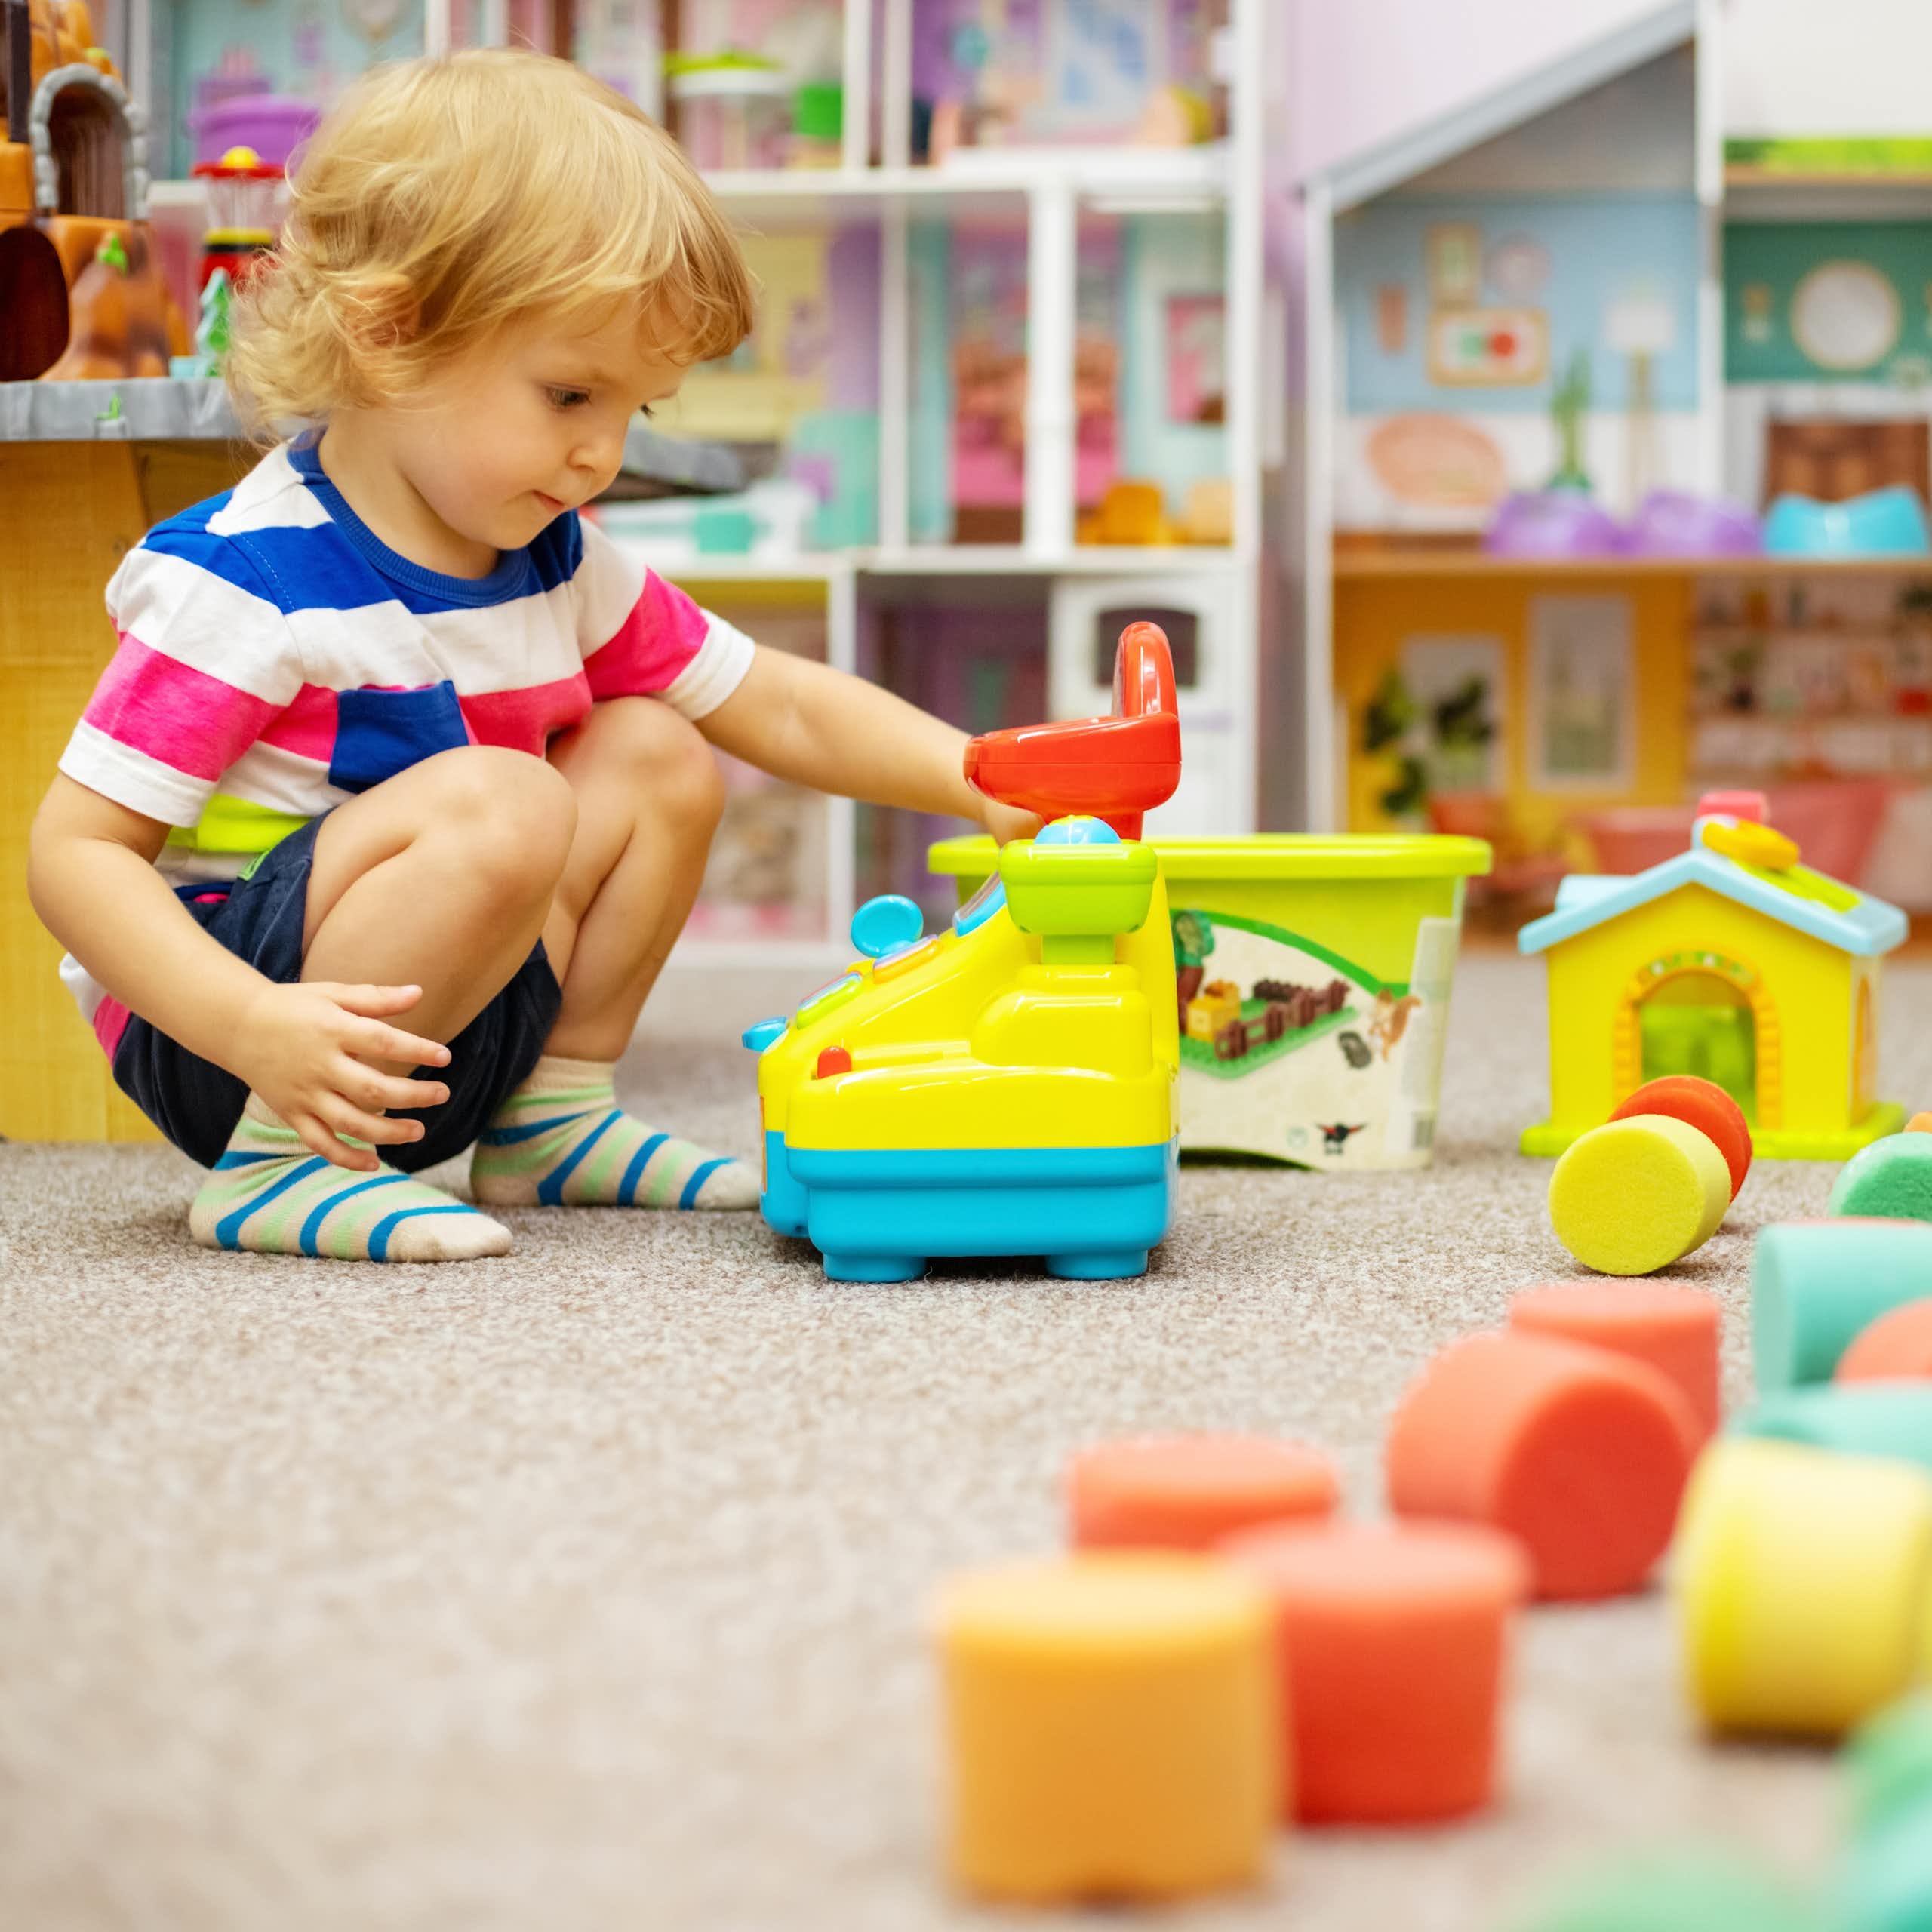 A child plays with soft toys in a nursery setting.